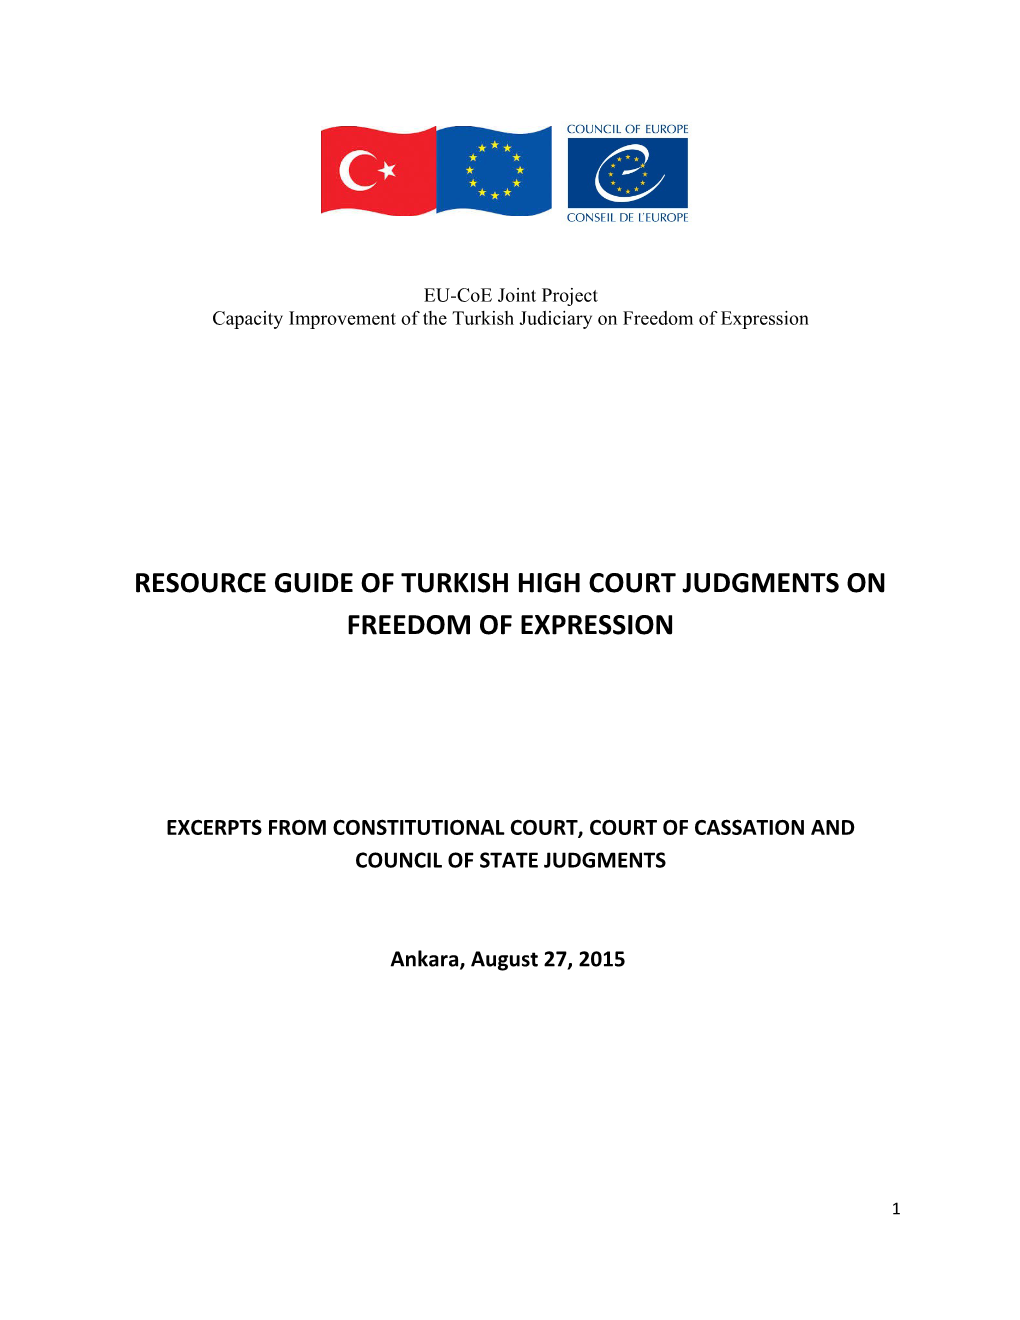 Resource Guide of Turkish High Court Judgments on Freedom of Expression